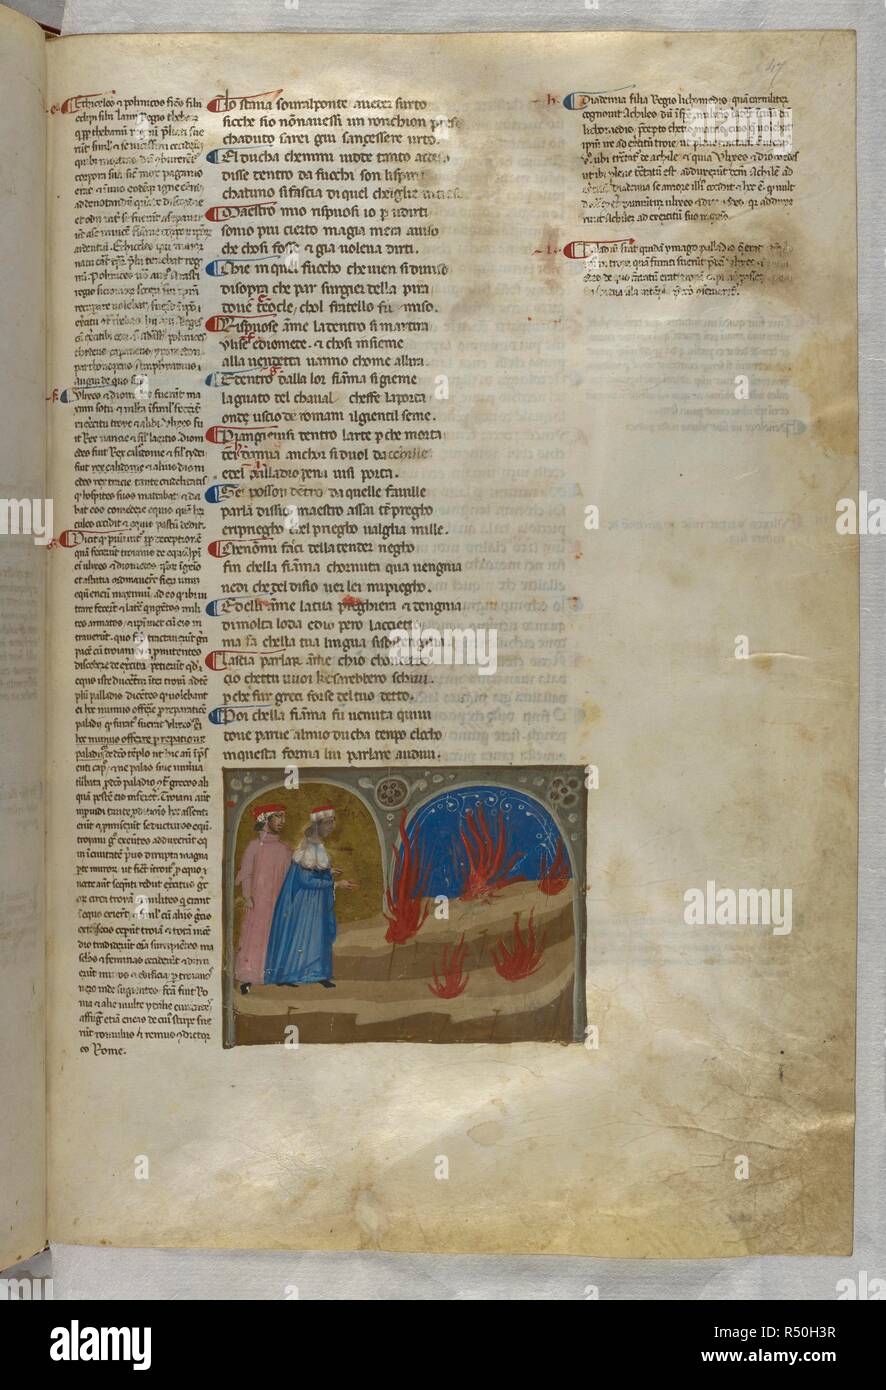 Inferno: Dante and Virgil walking towards the gates of hell. Dante Alighieri,  Divina Commedia ( The Divine Comedy ), with a commentary in Latin. 1st half  of the 14th century. Source: Egerton